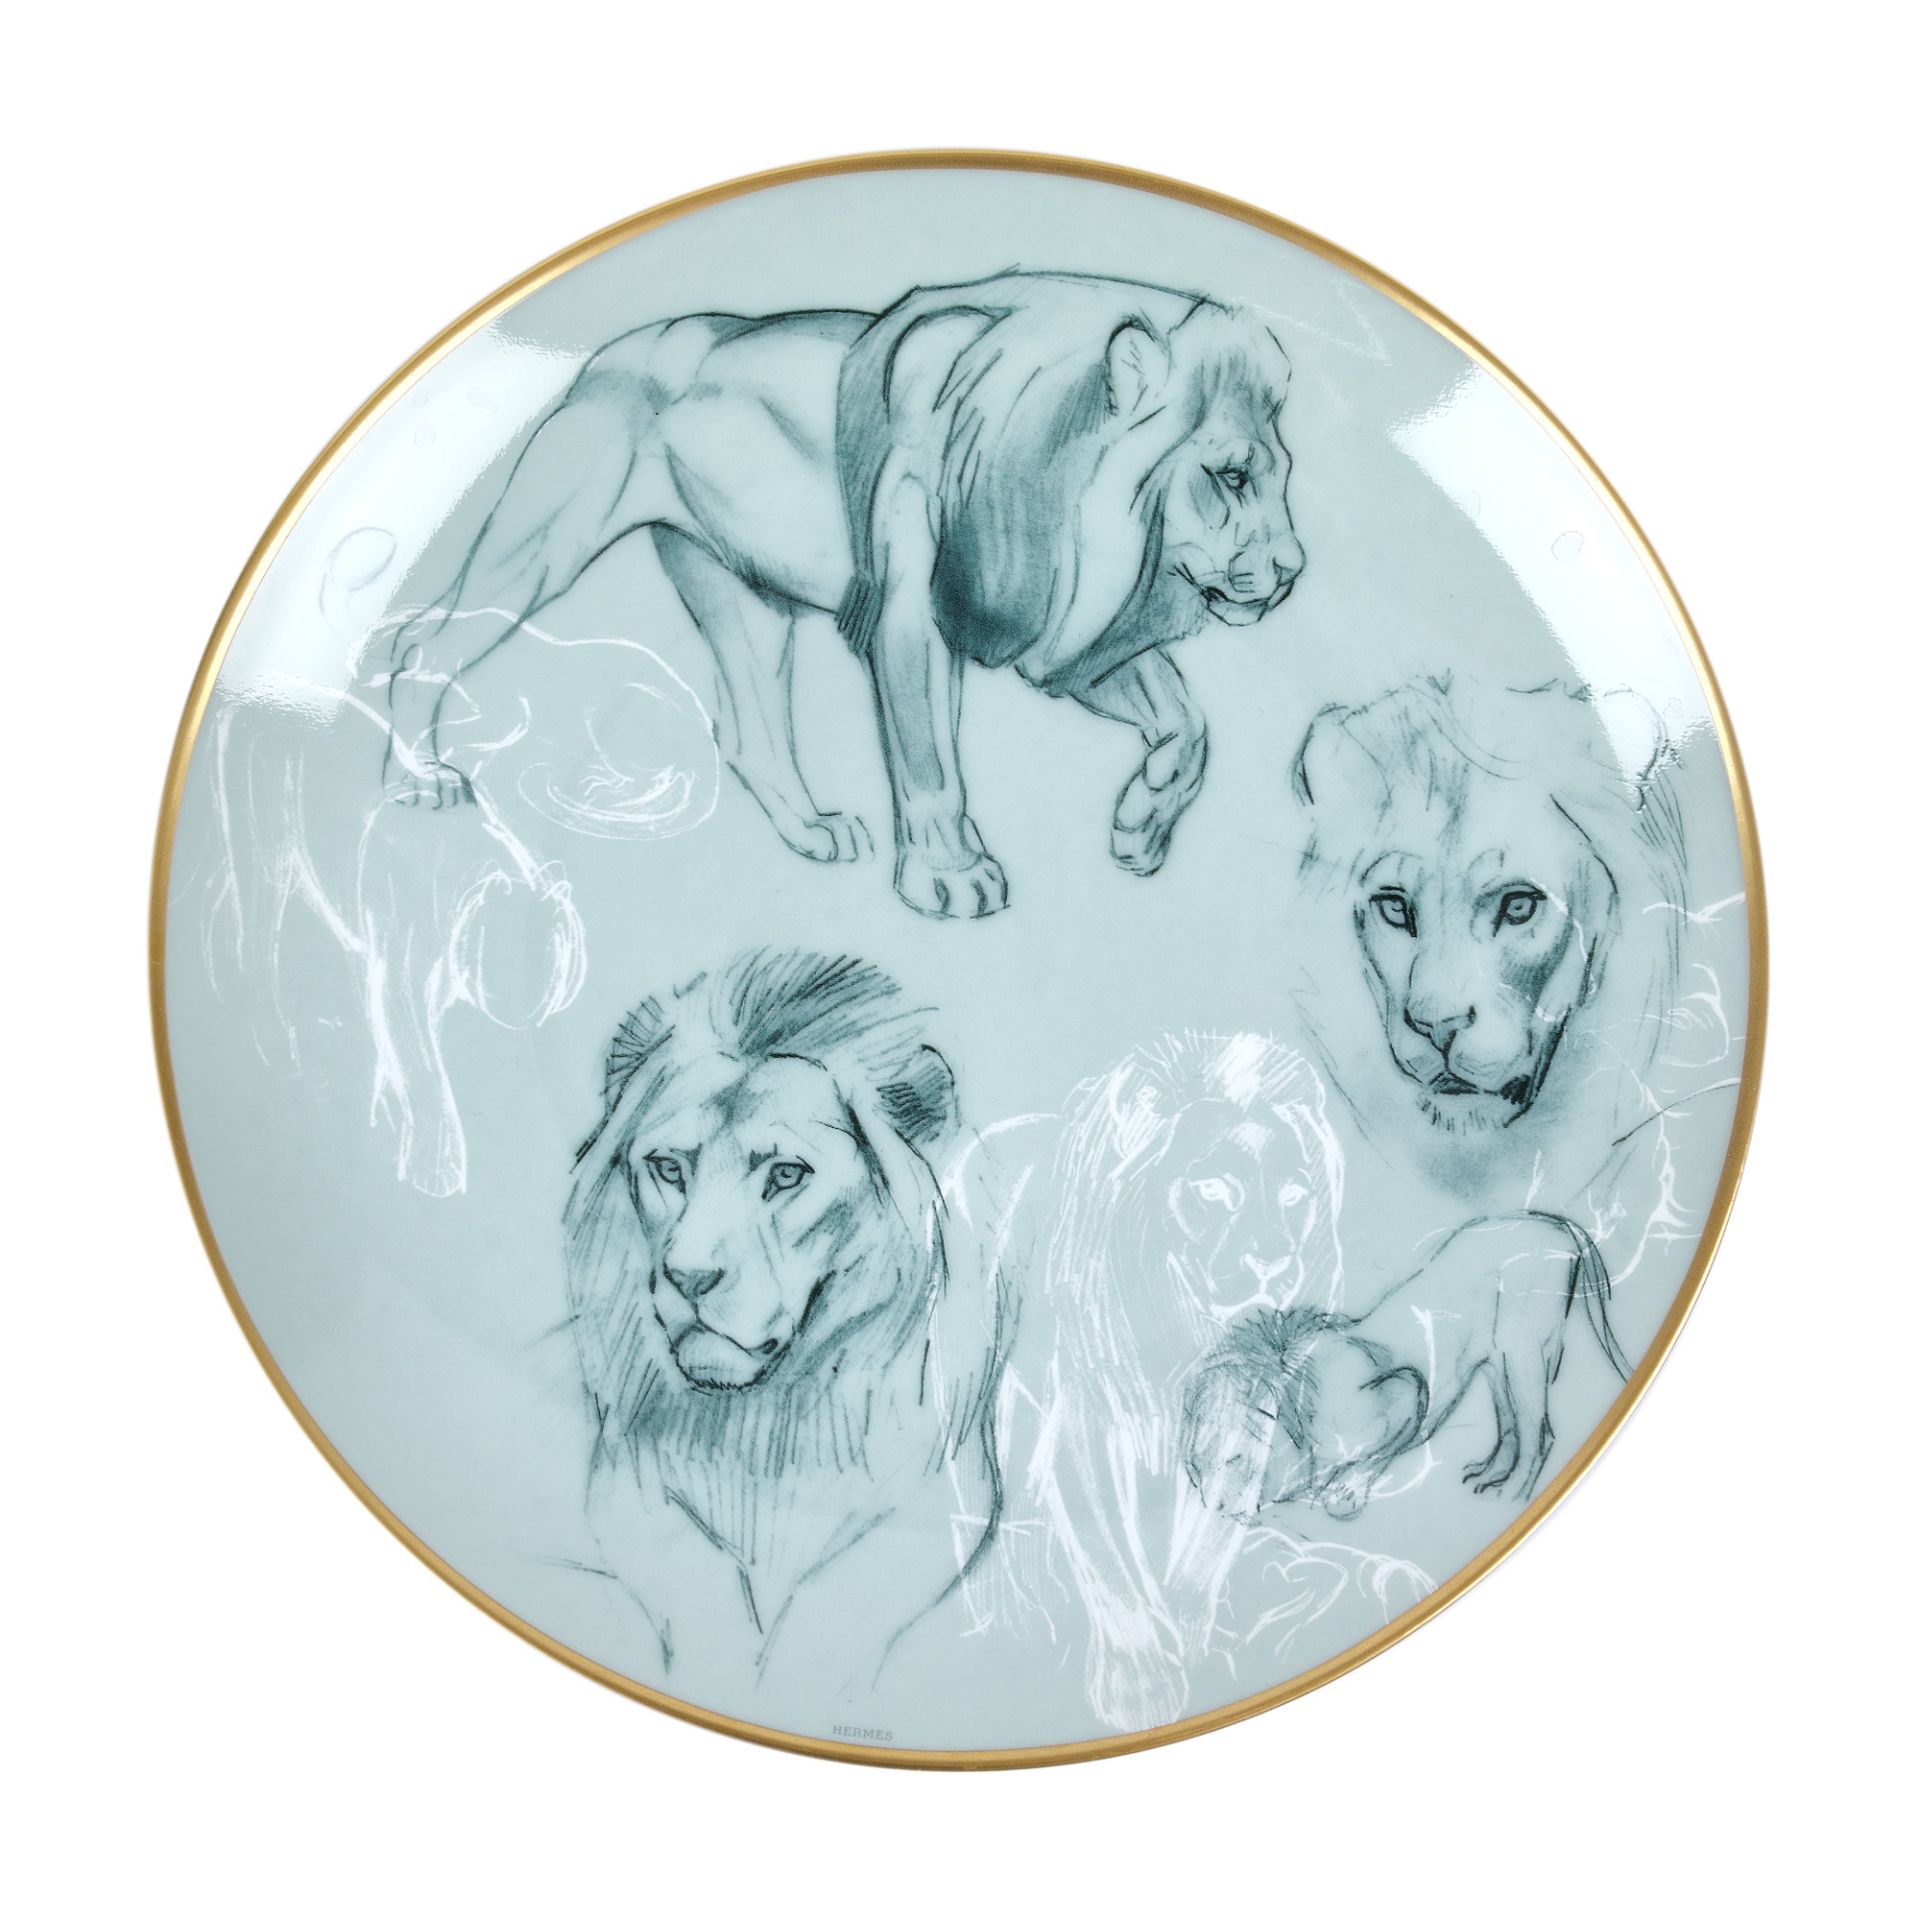 Hermès porcelain set, consisting of two plates, from the collection "Carnets d'Equateur", original b - Image 4 of 5